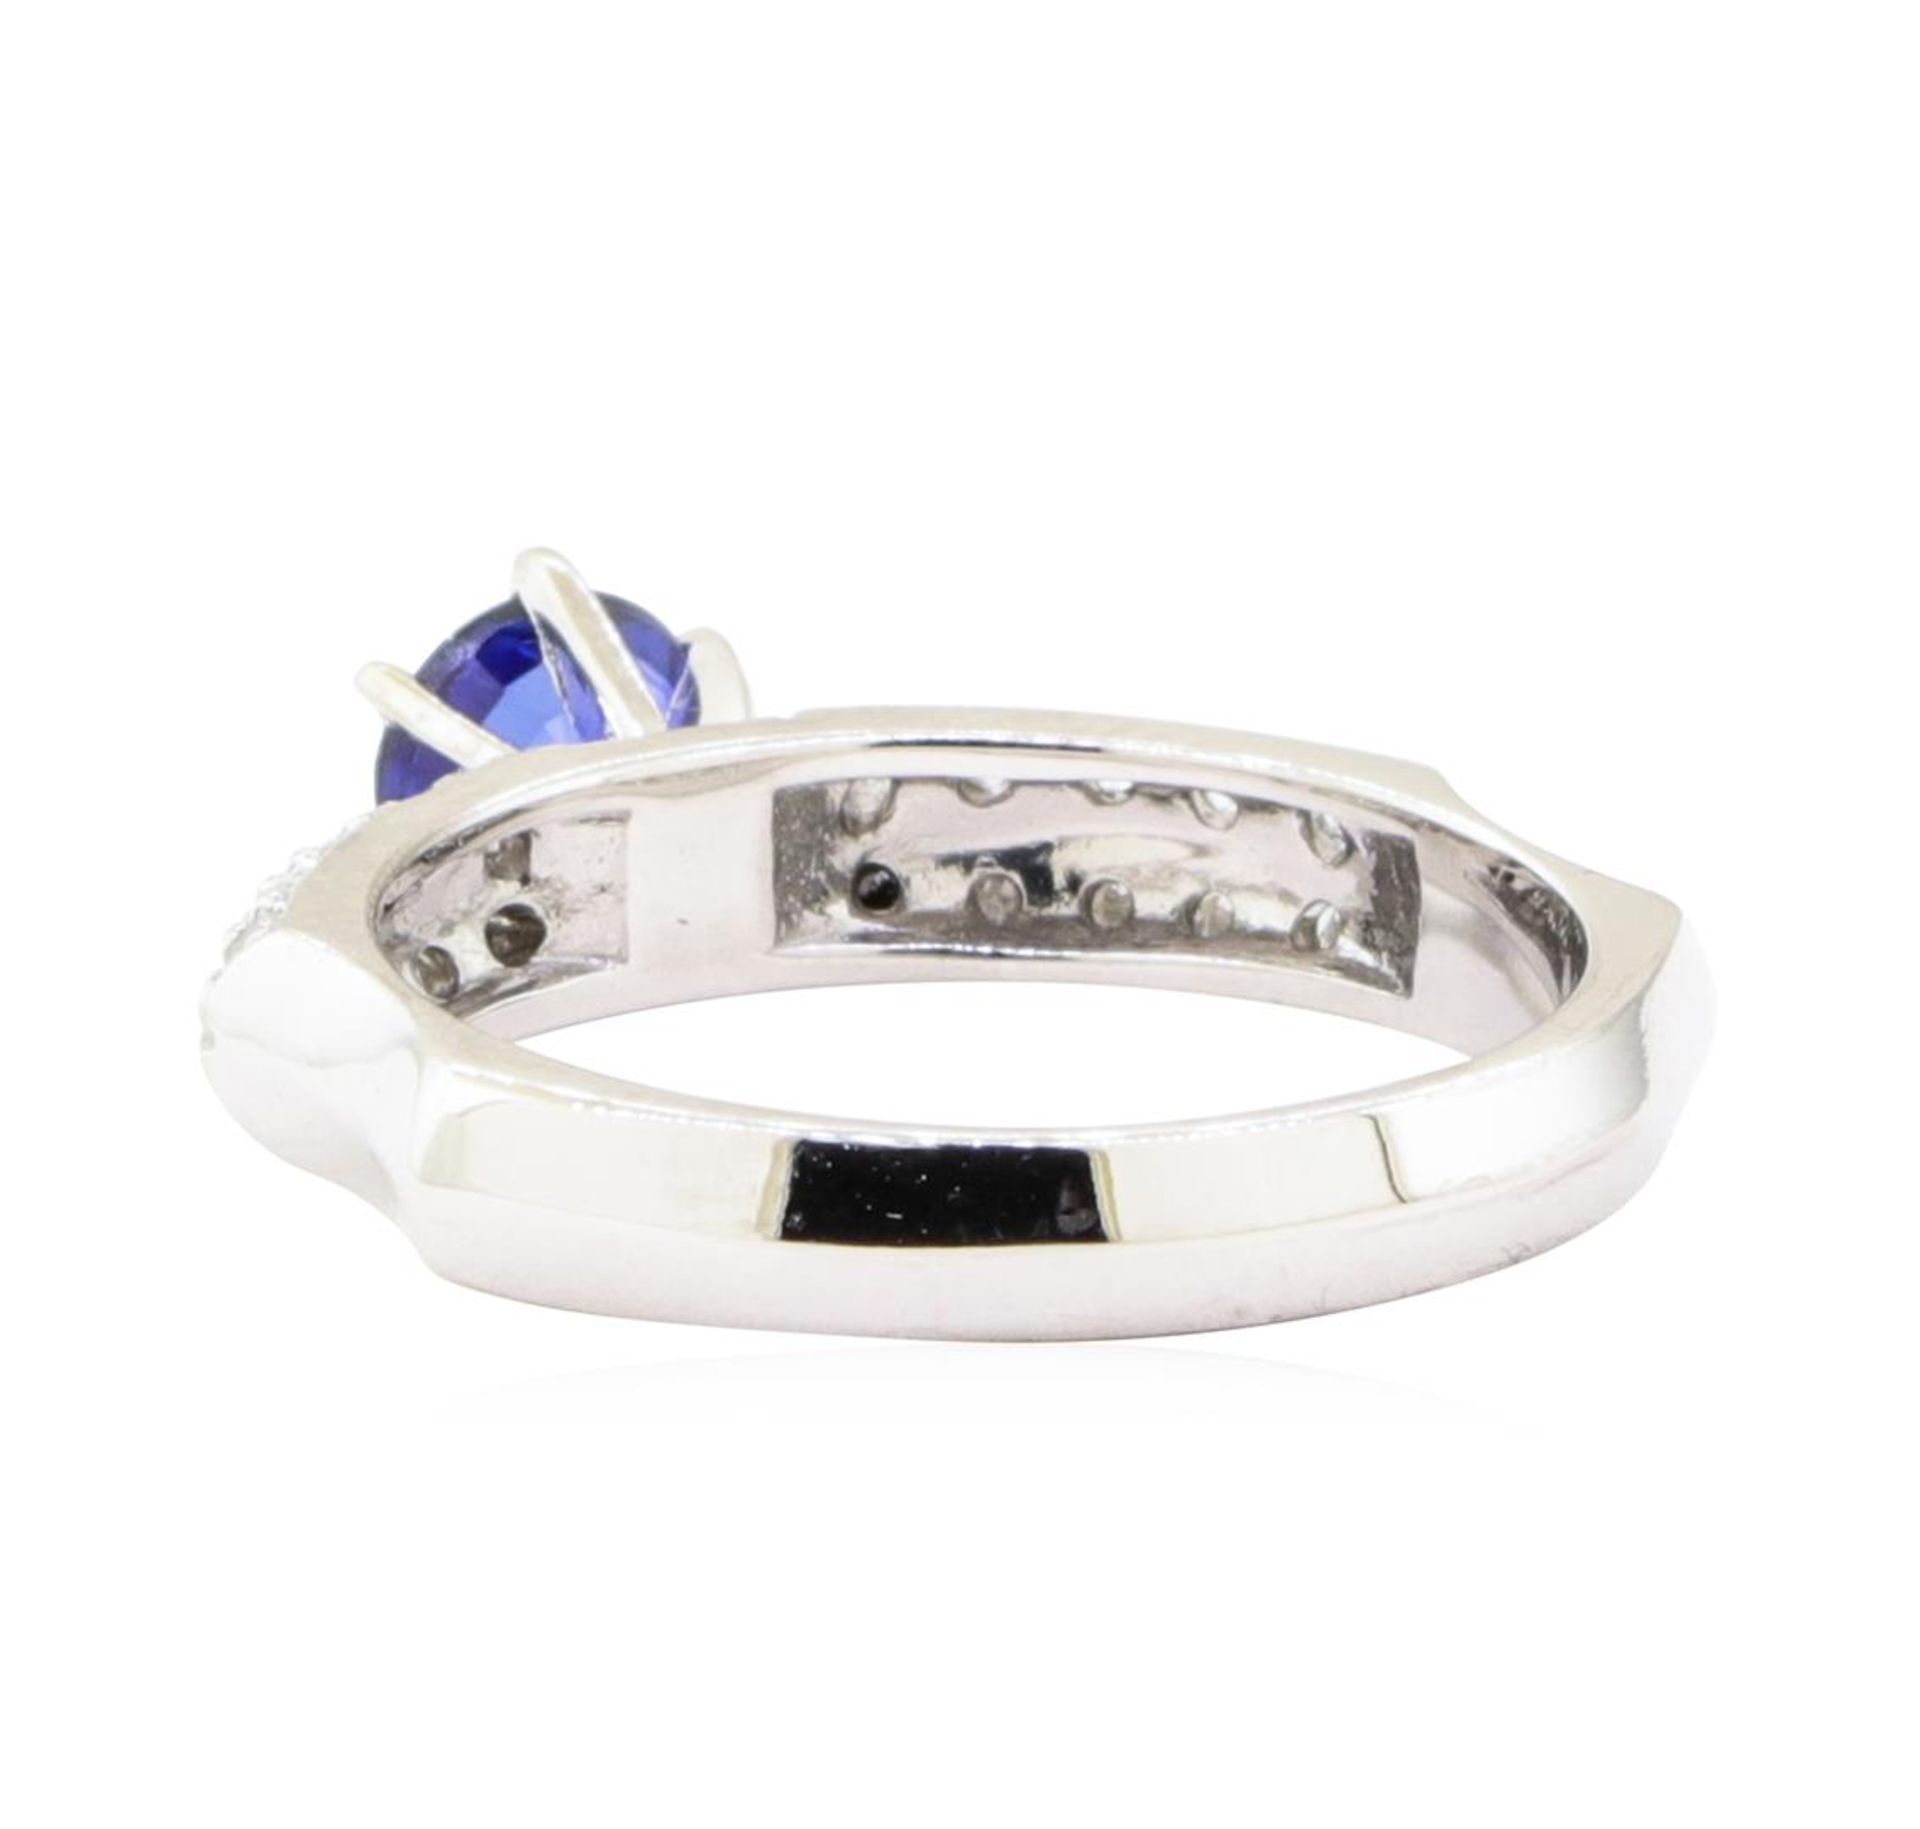 0.95 ctw Sapphire And Diamond Ring - 18KT White Gold - Image 5 of 10